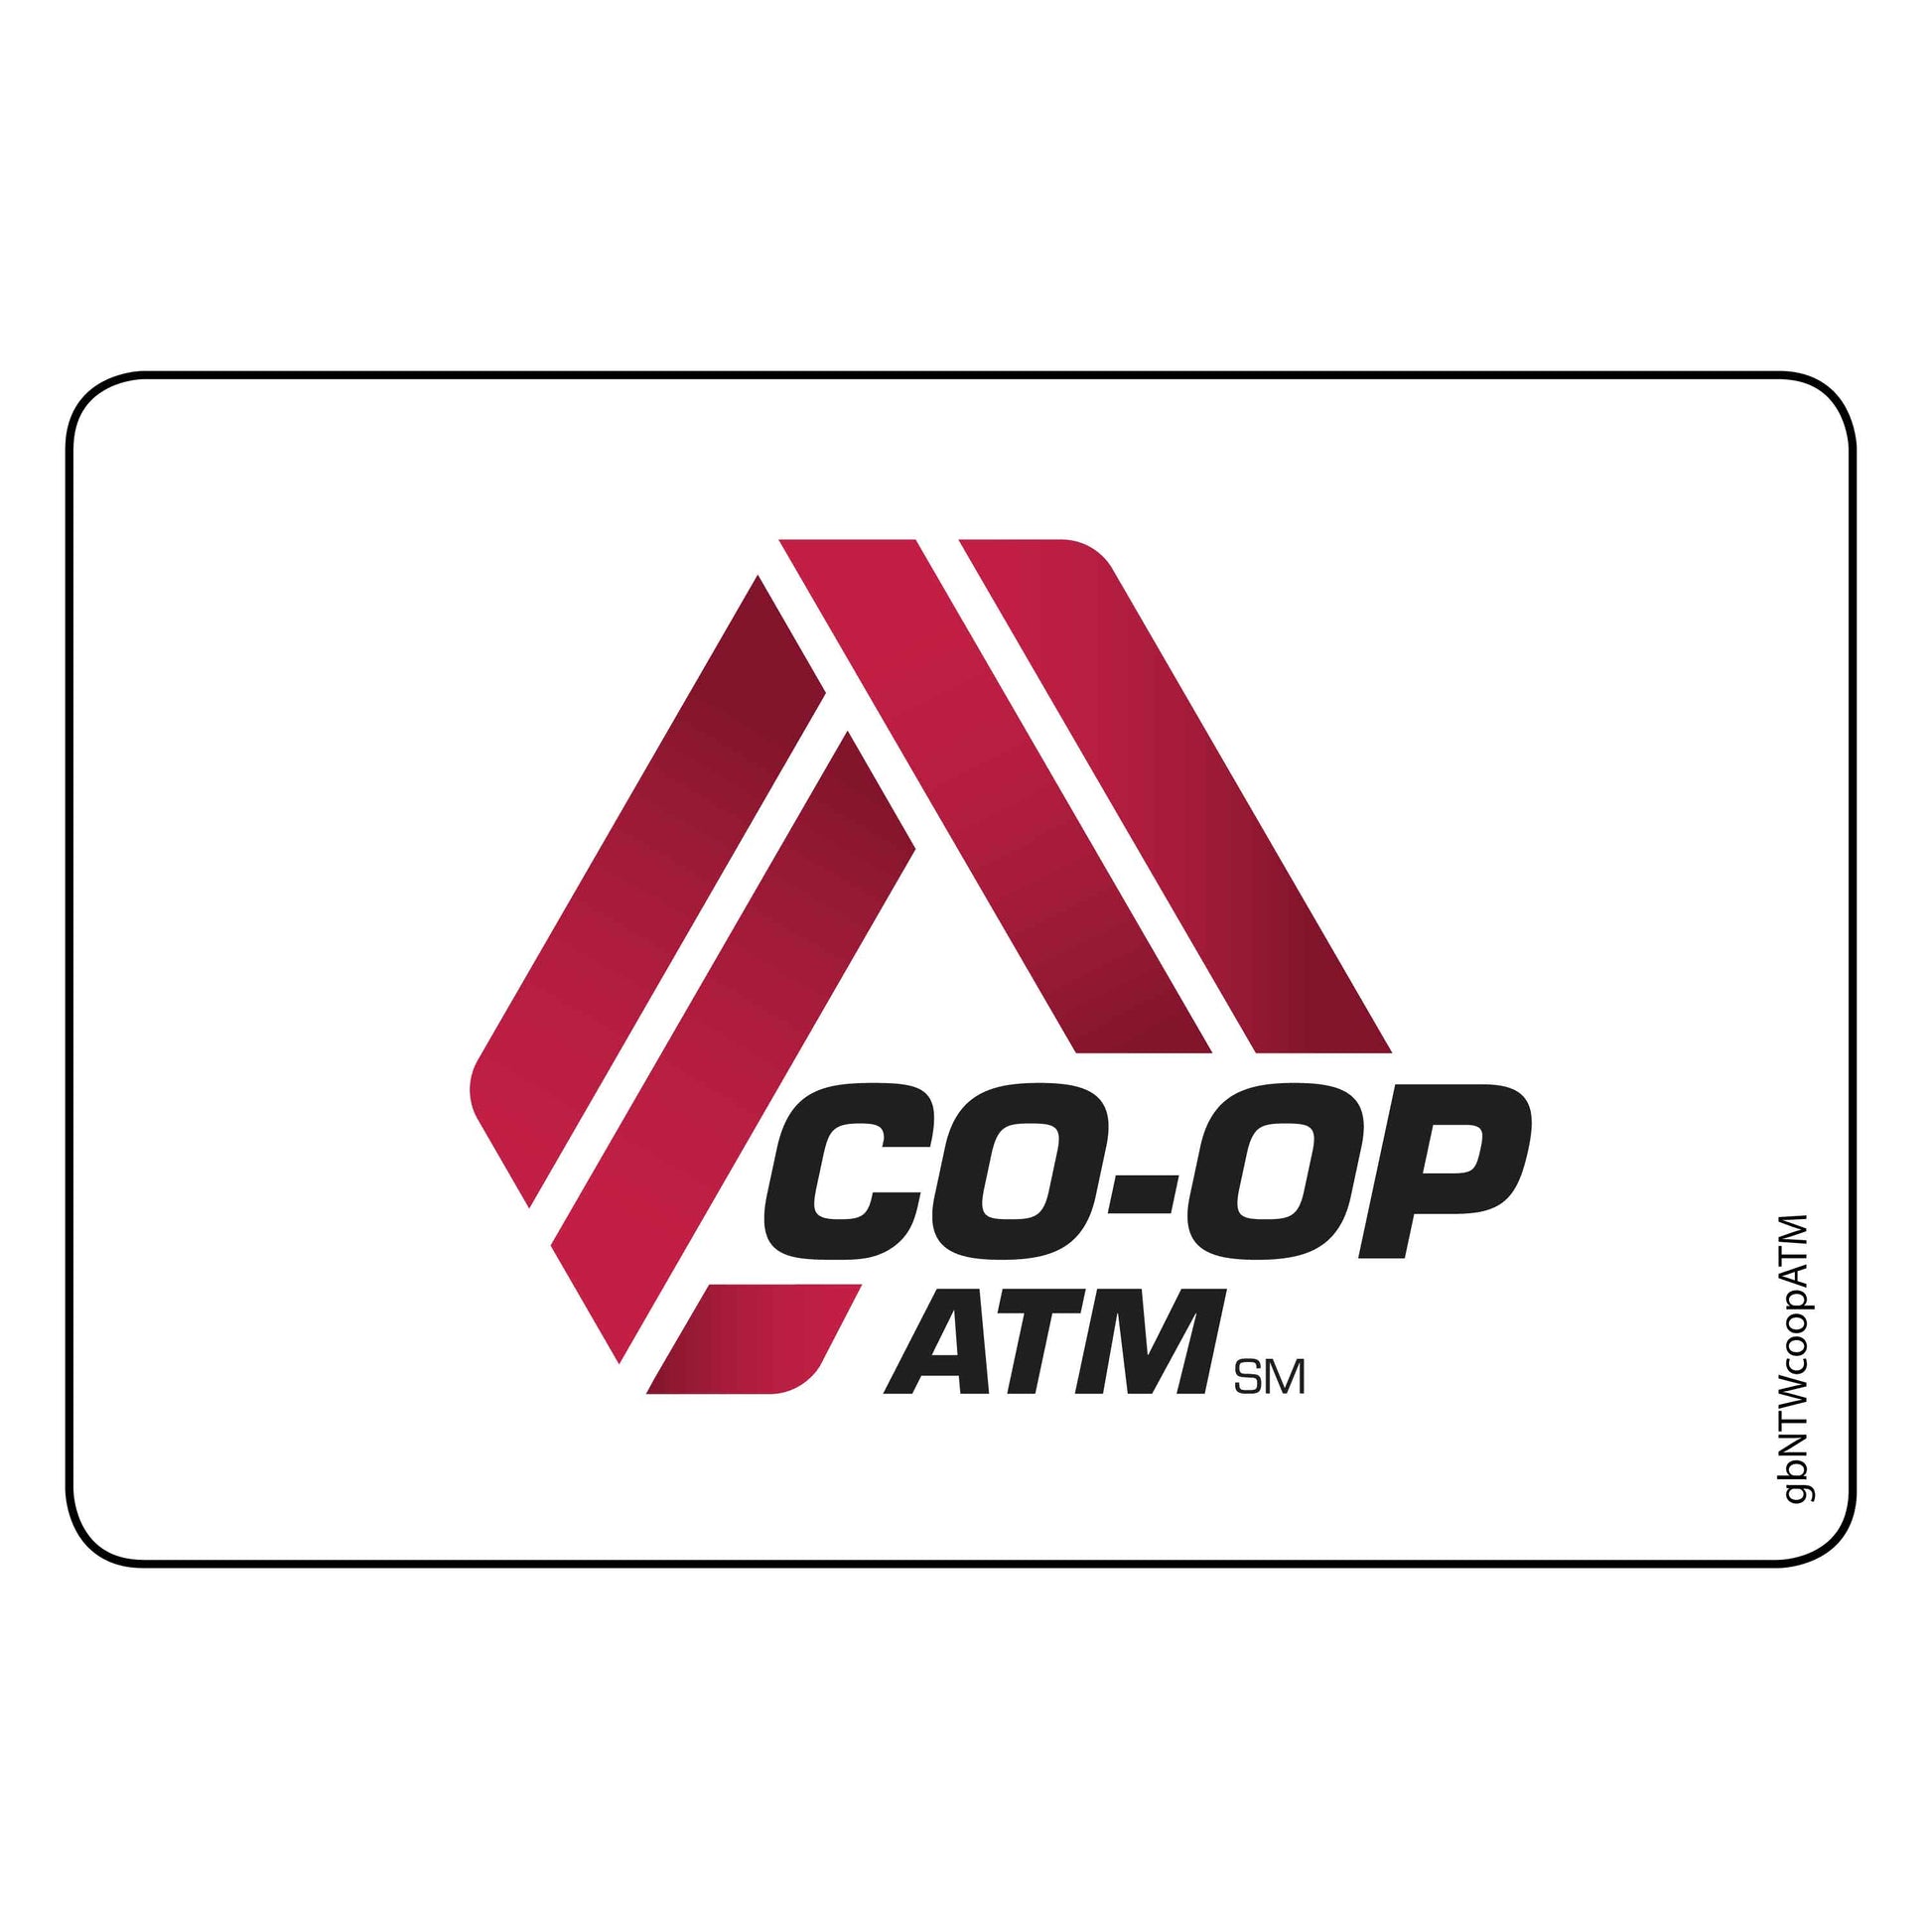 Single Network Decal, Co-op ATM. 3 inches by 2 inches in size.